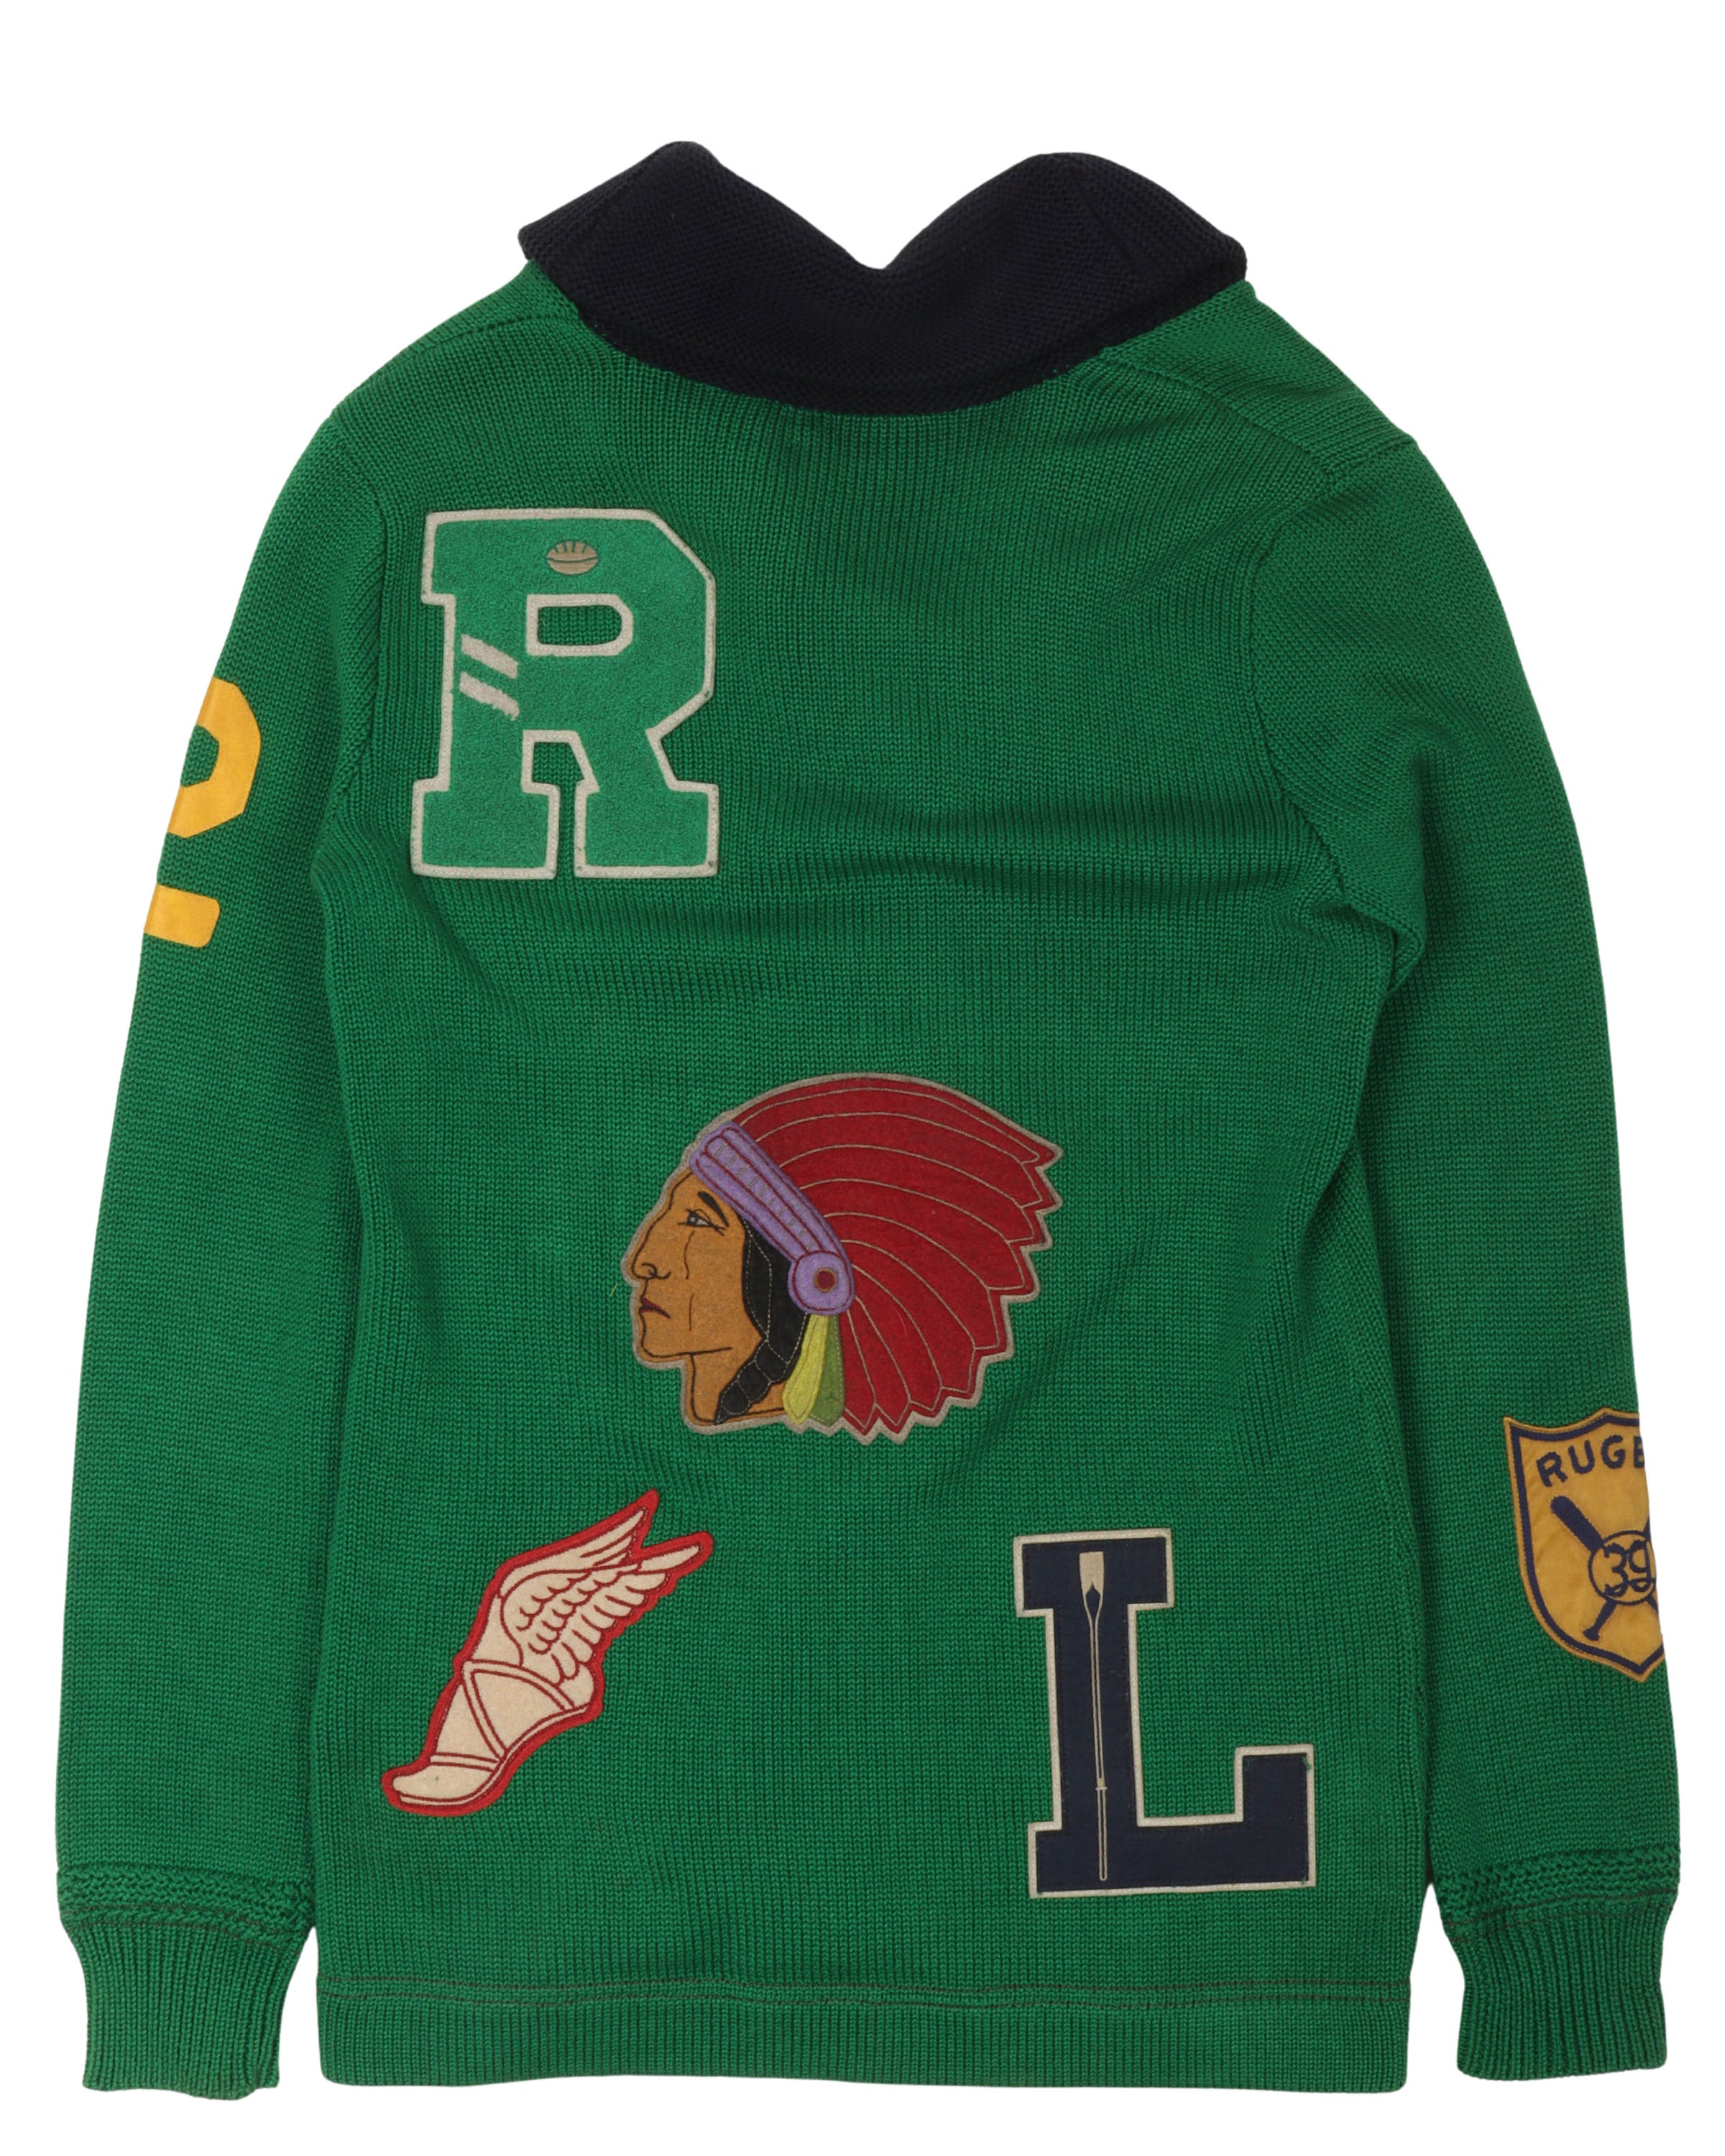 Vintage Ralph Lauren Rugby Patch Cardigan Sweater